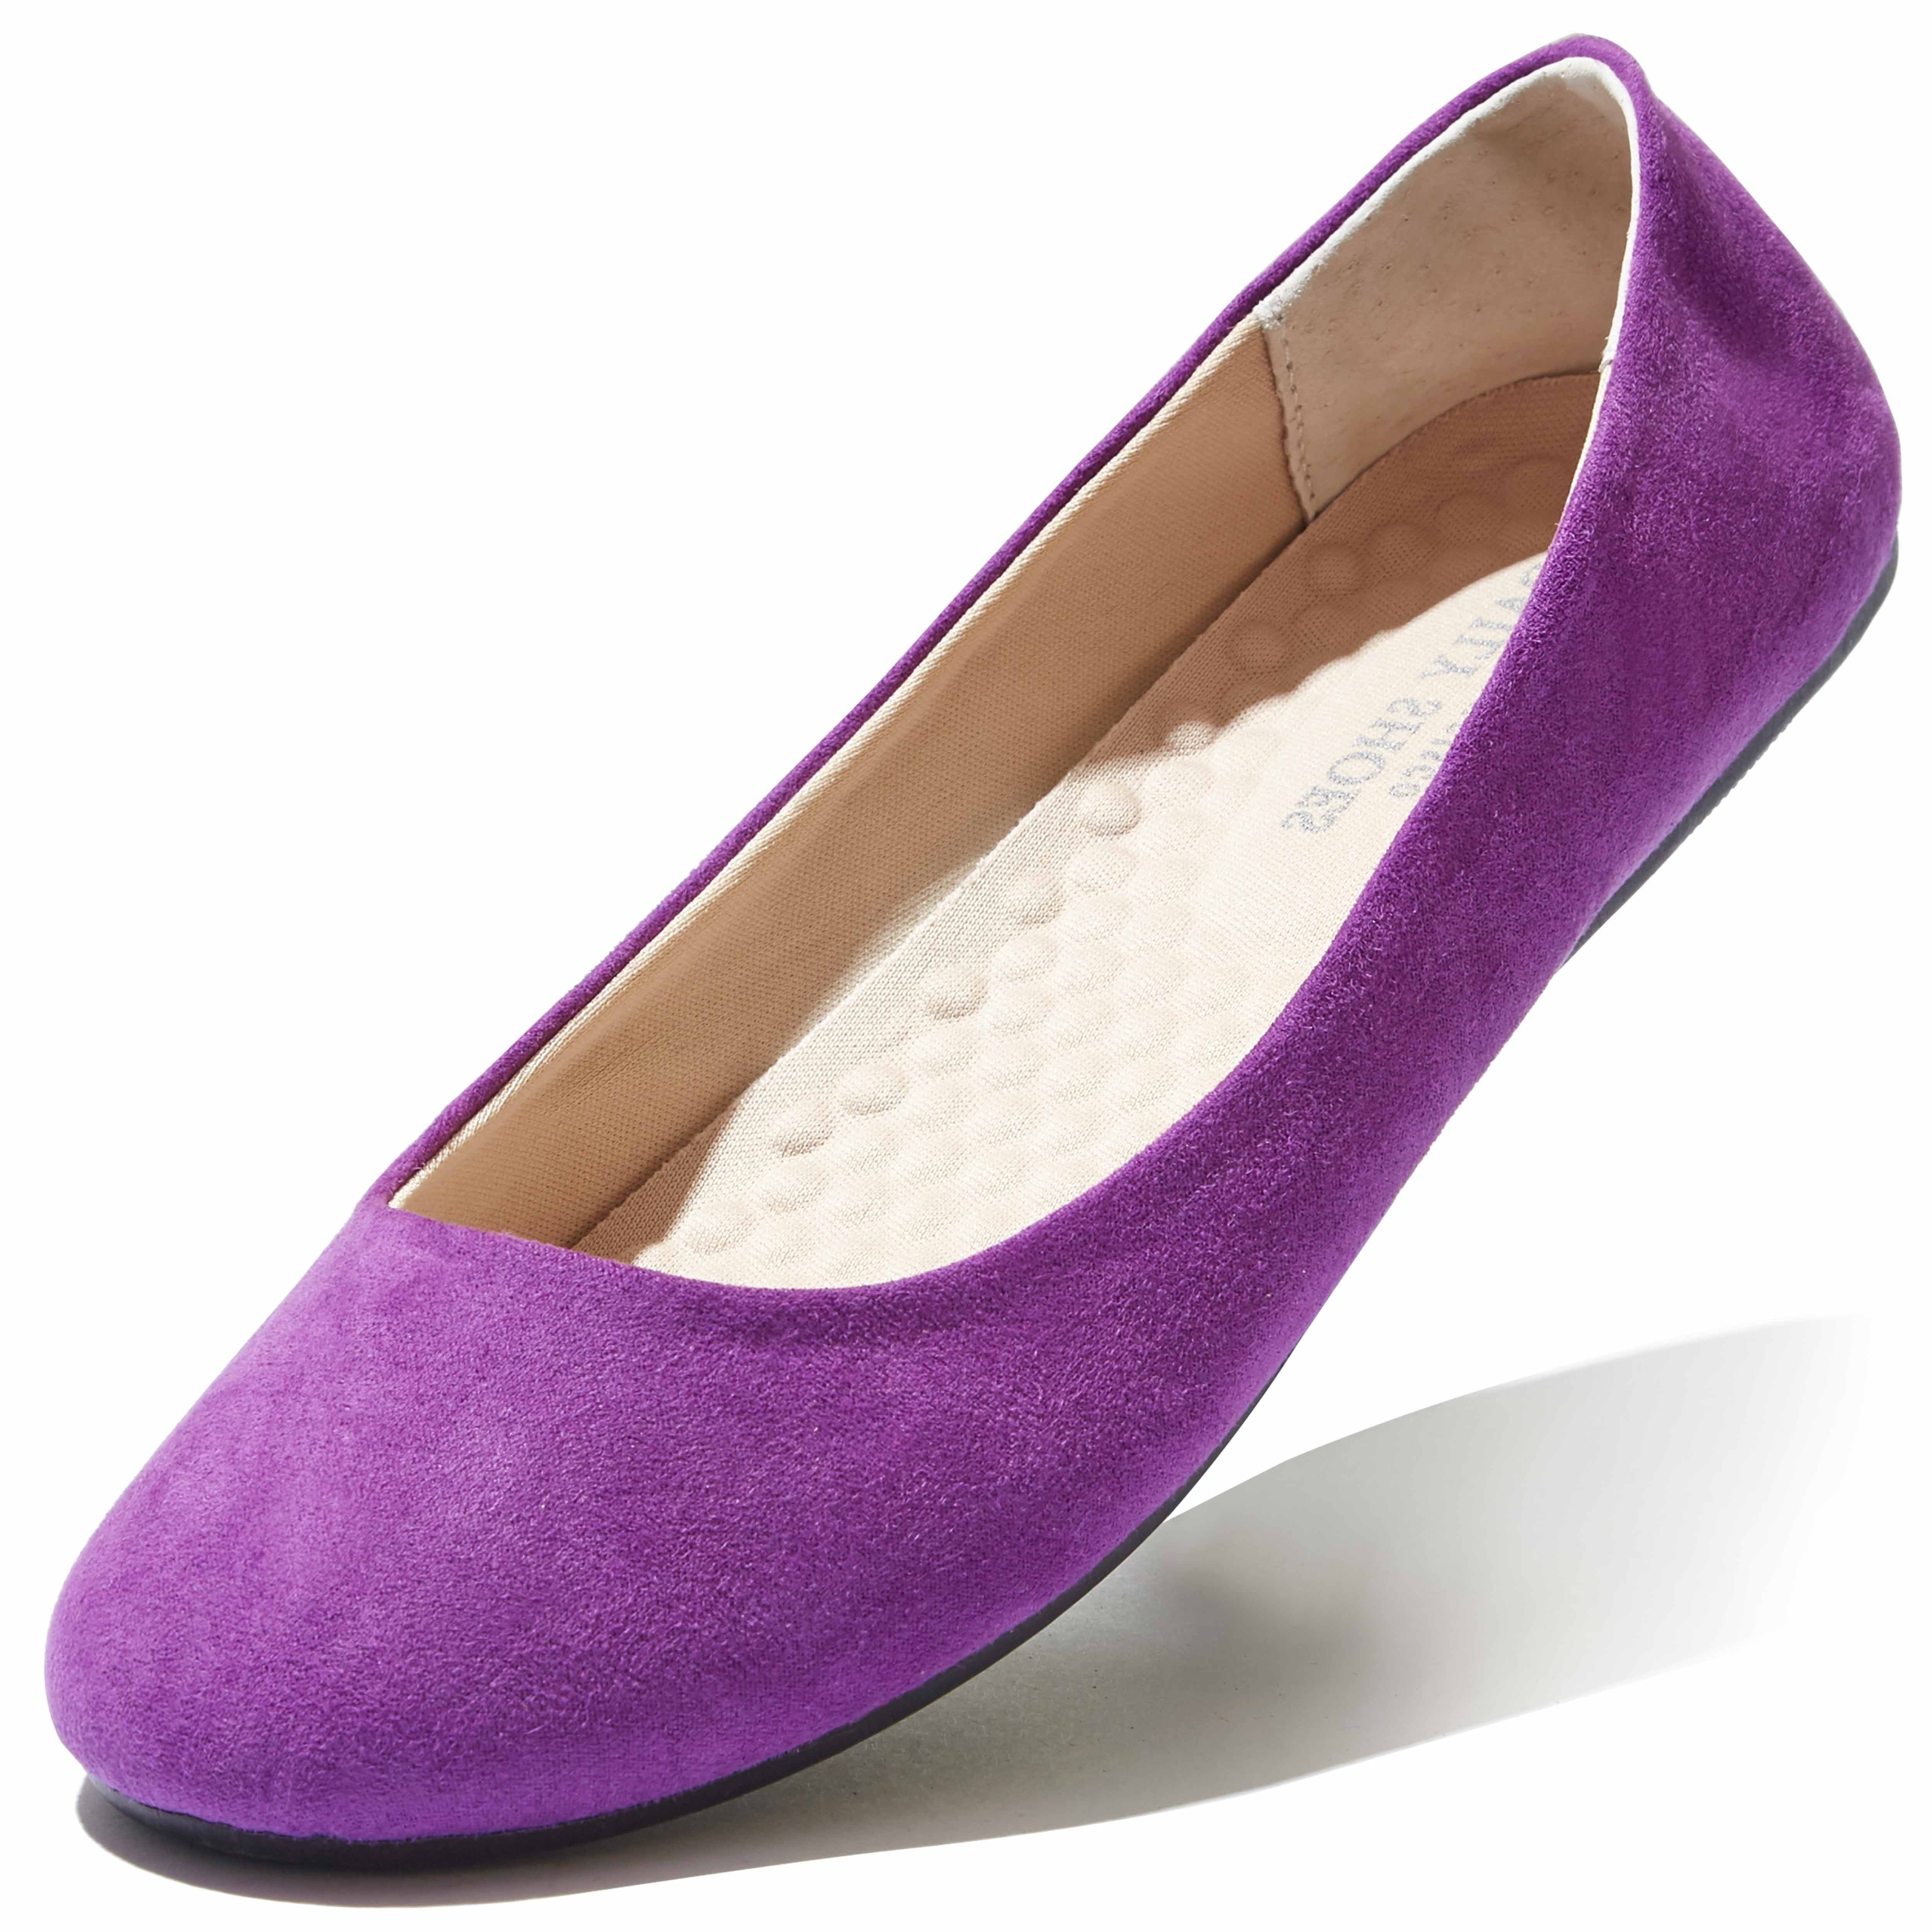 Buy > purple flat shoes for ladies > in stock